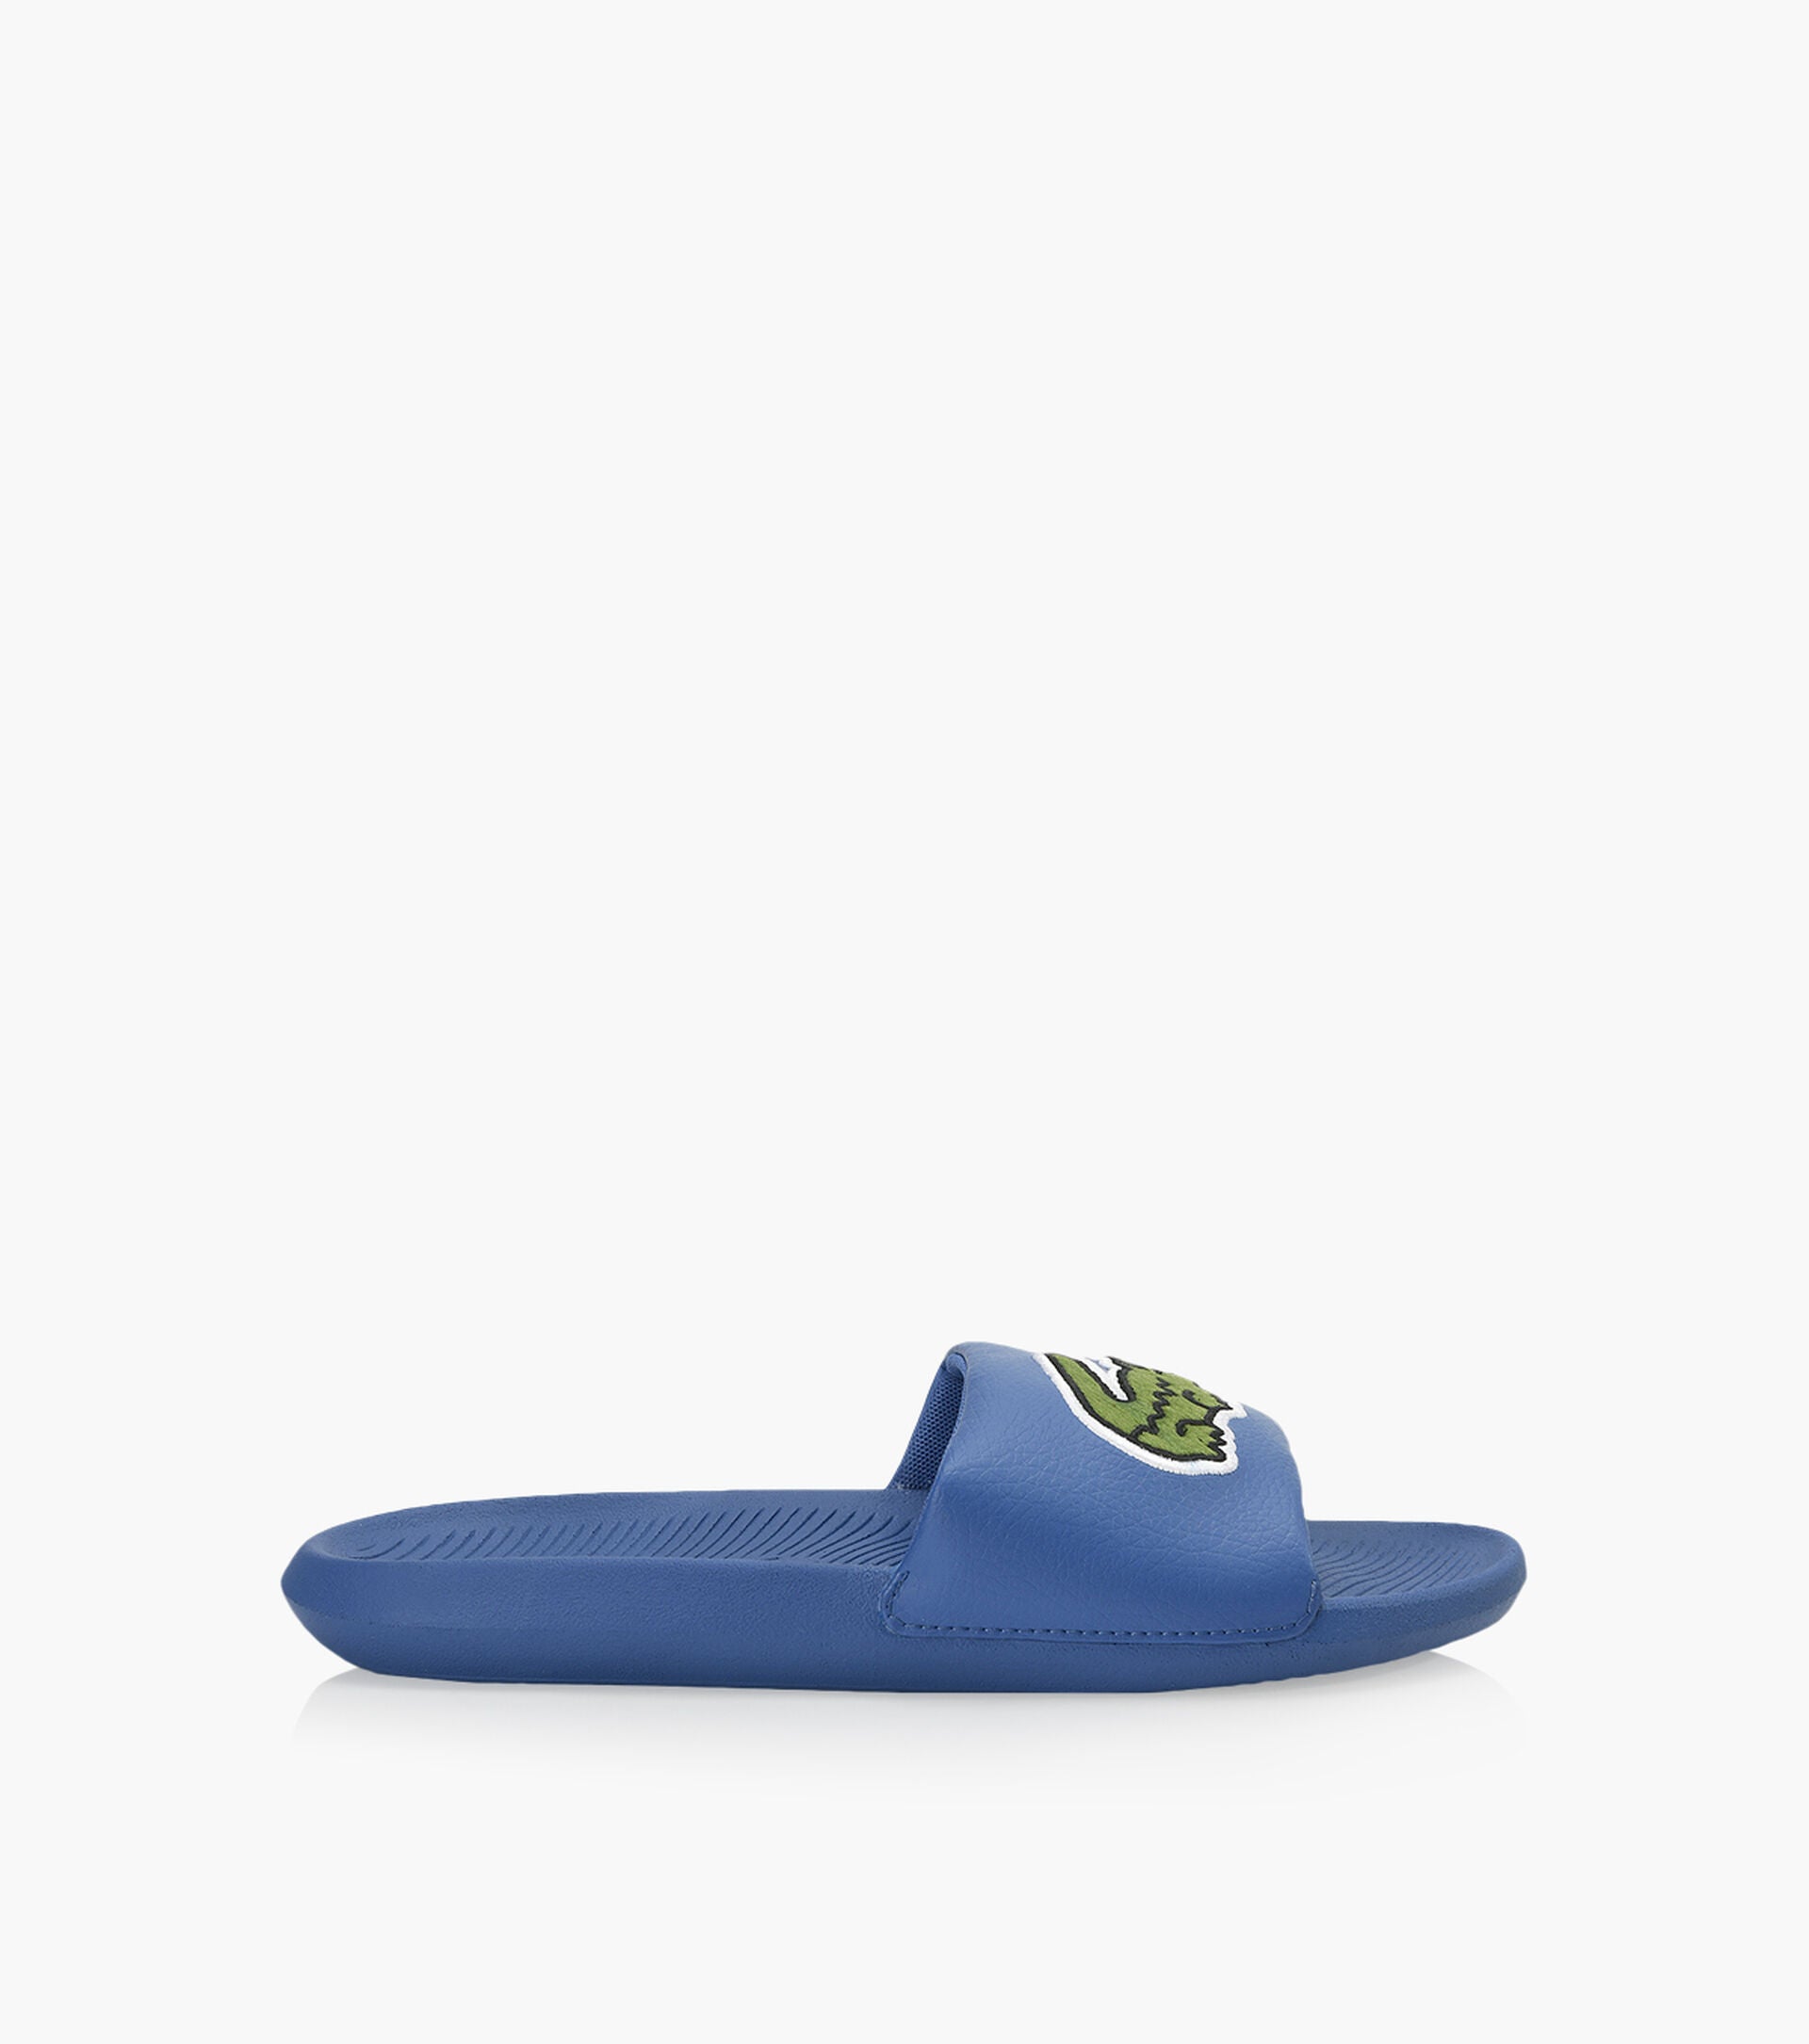 Lacoste Men’s Croco Slides Blue/Green Synthetic